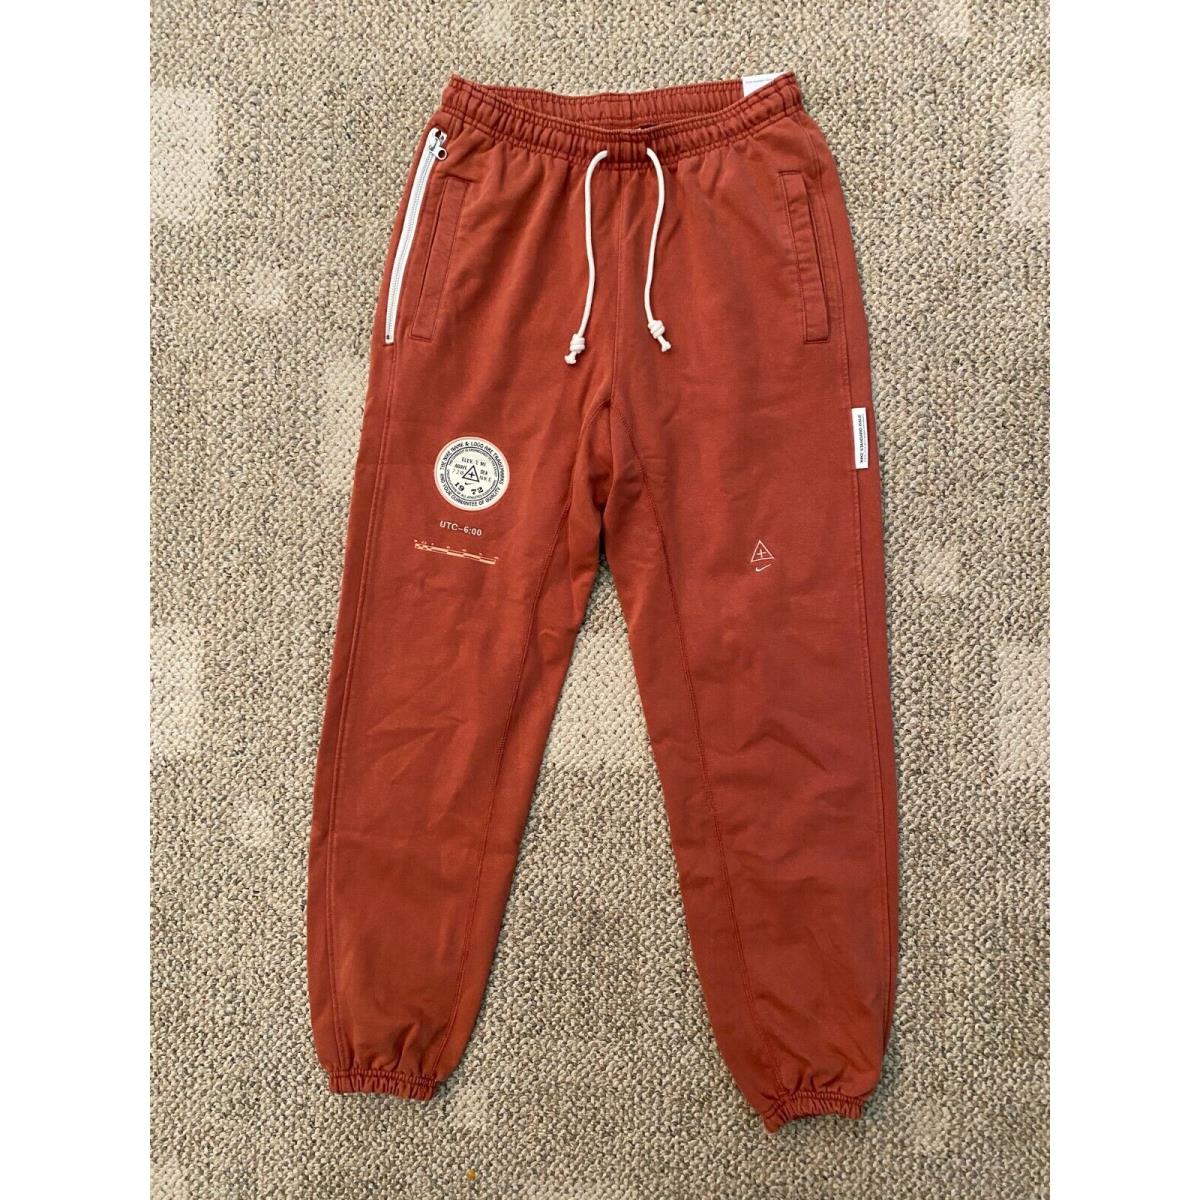 Men`s S Nike Standard Issue Basketball Jogger Athletic Pants Rust DQ3532-670